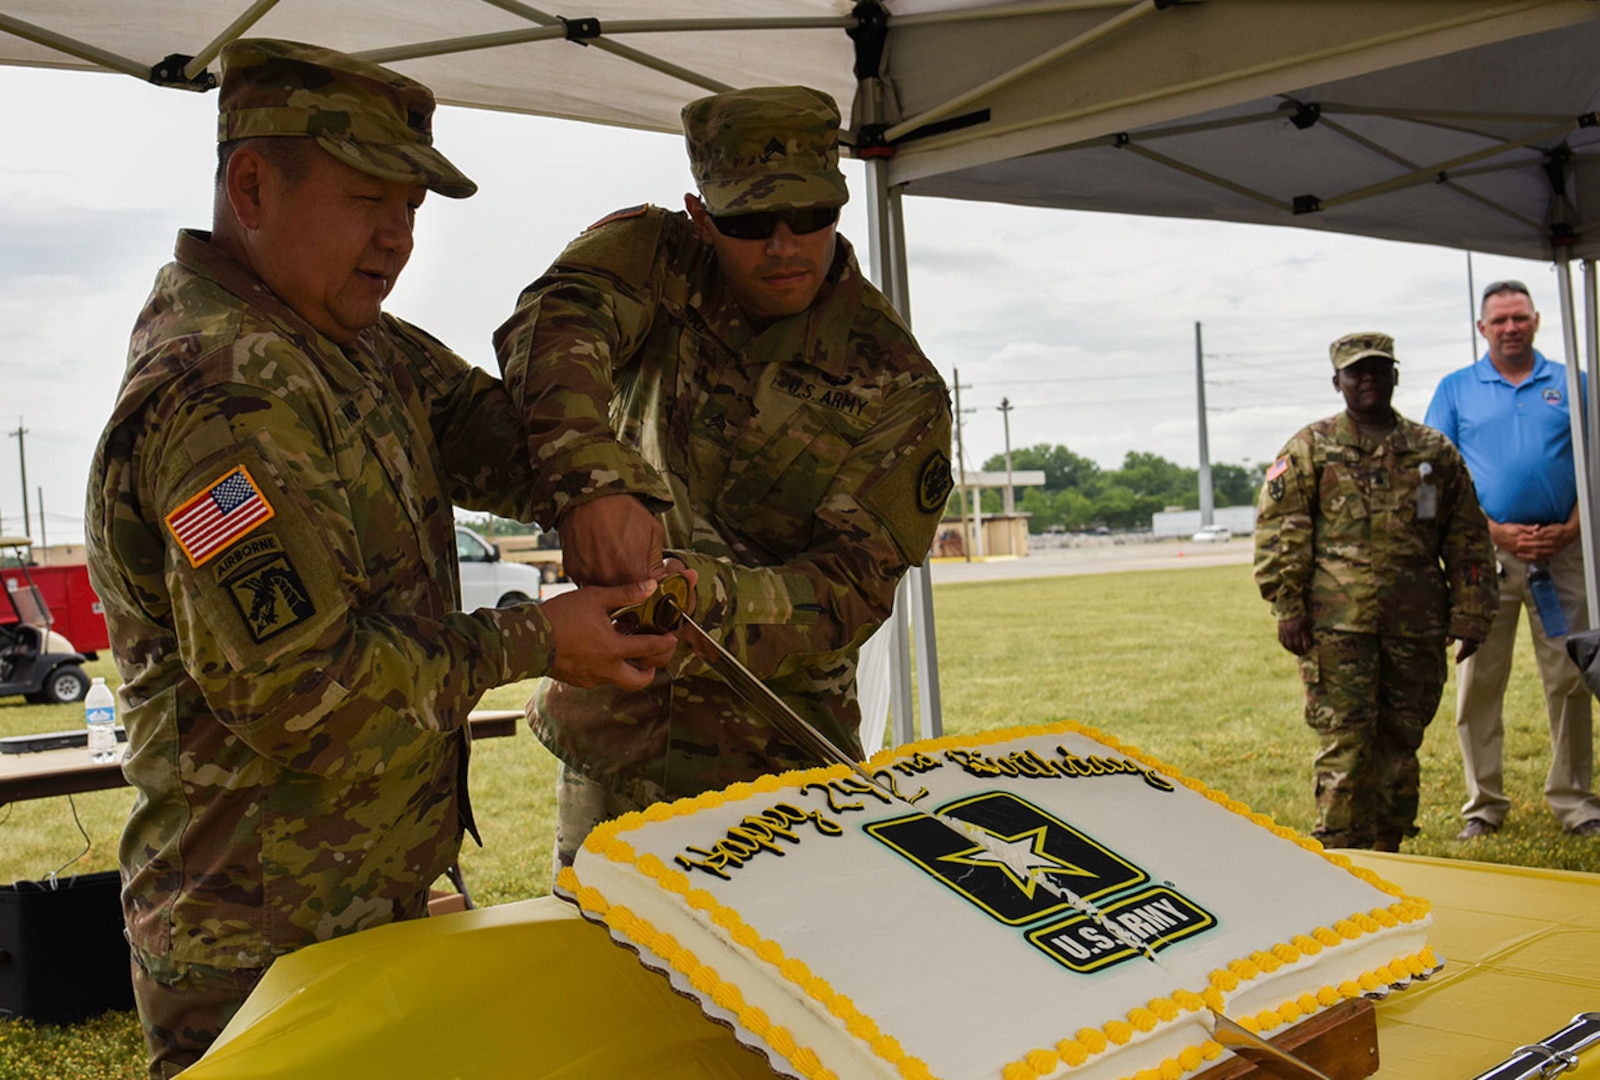 Col. Yee C. Hang, director, DLA Land and Maritime Land Supplier Opperstations, cuts the Army birthday cake on June 14 with Sgt Diaz at Defense Supply Center Columbus.  The cake ceremony is a long standing Army tradition where the soldier with longest time in service cuts the cake with the soldier with the least amount of time in service using the ceremonial military saber.